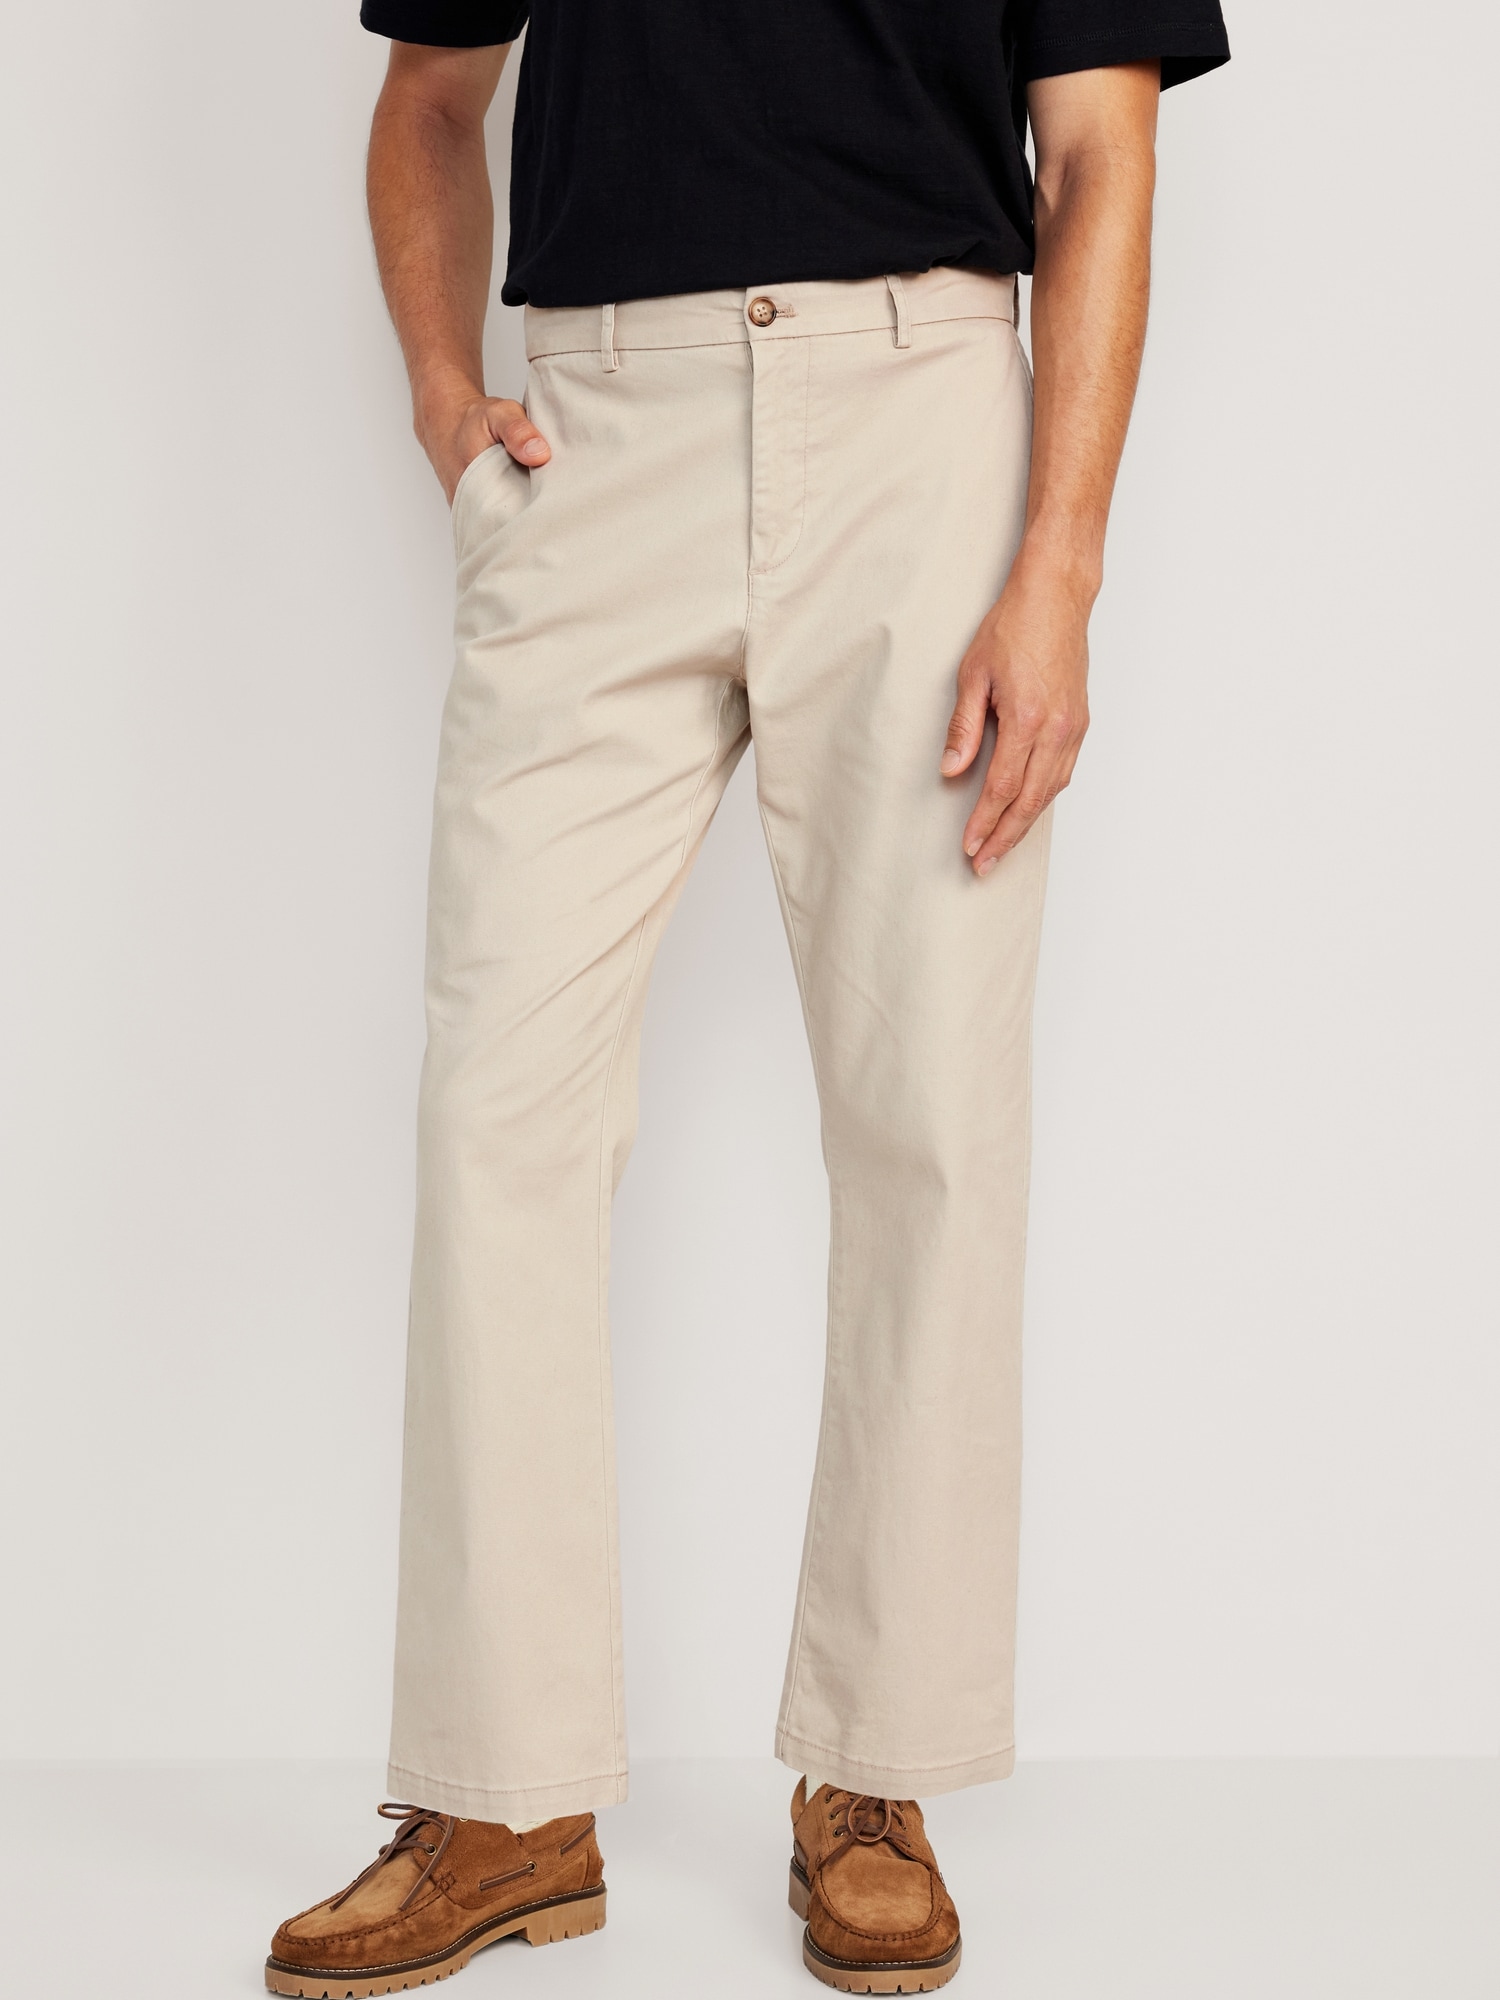 Loose Built-In Flex Rotation Chino Pants for Men